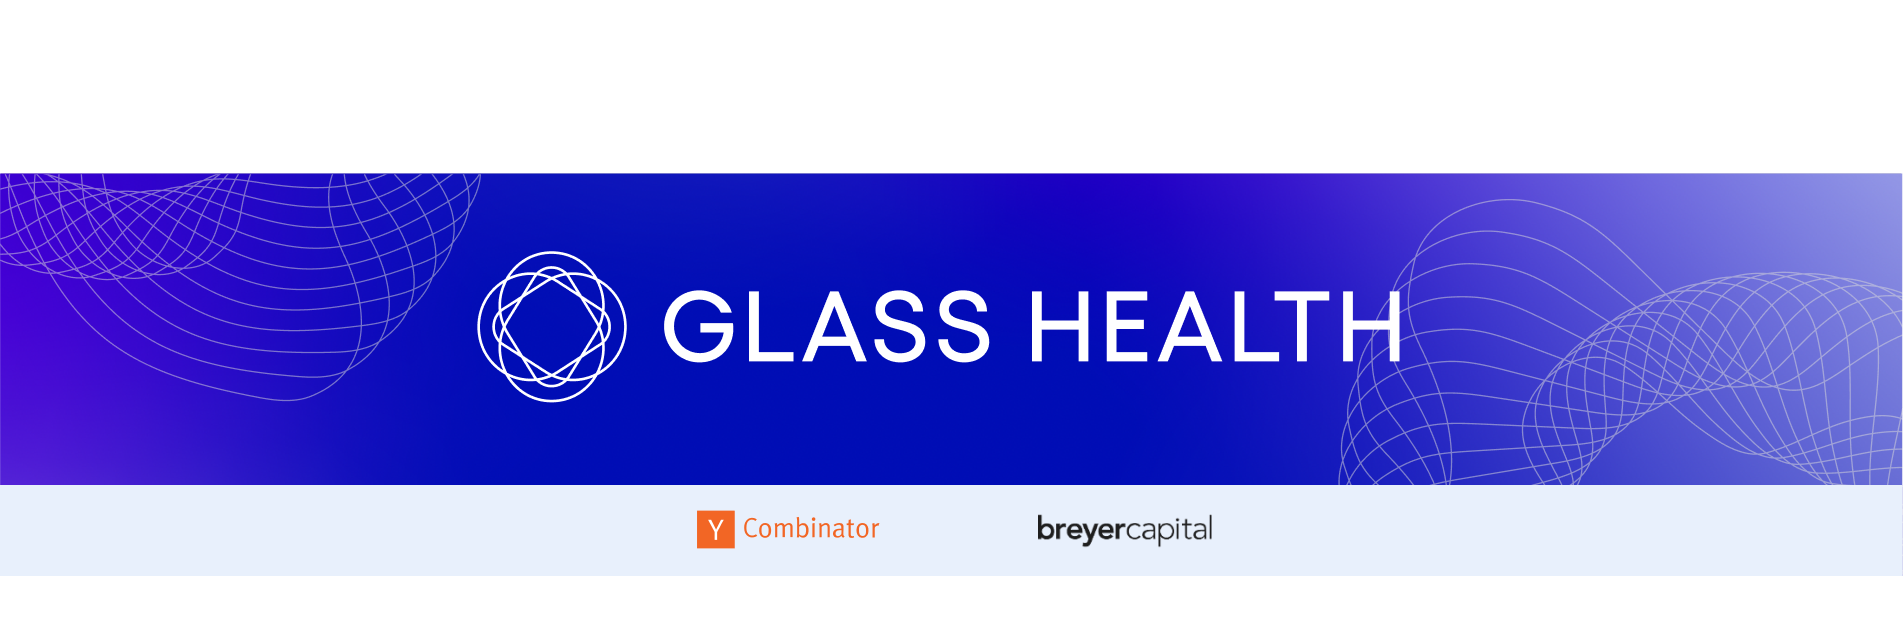 Banner announcement with Glass Health logo, Y Combinator logo, and Breyer Capital logo.